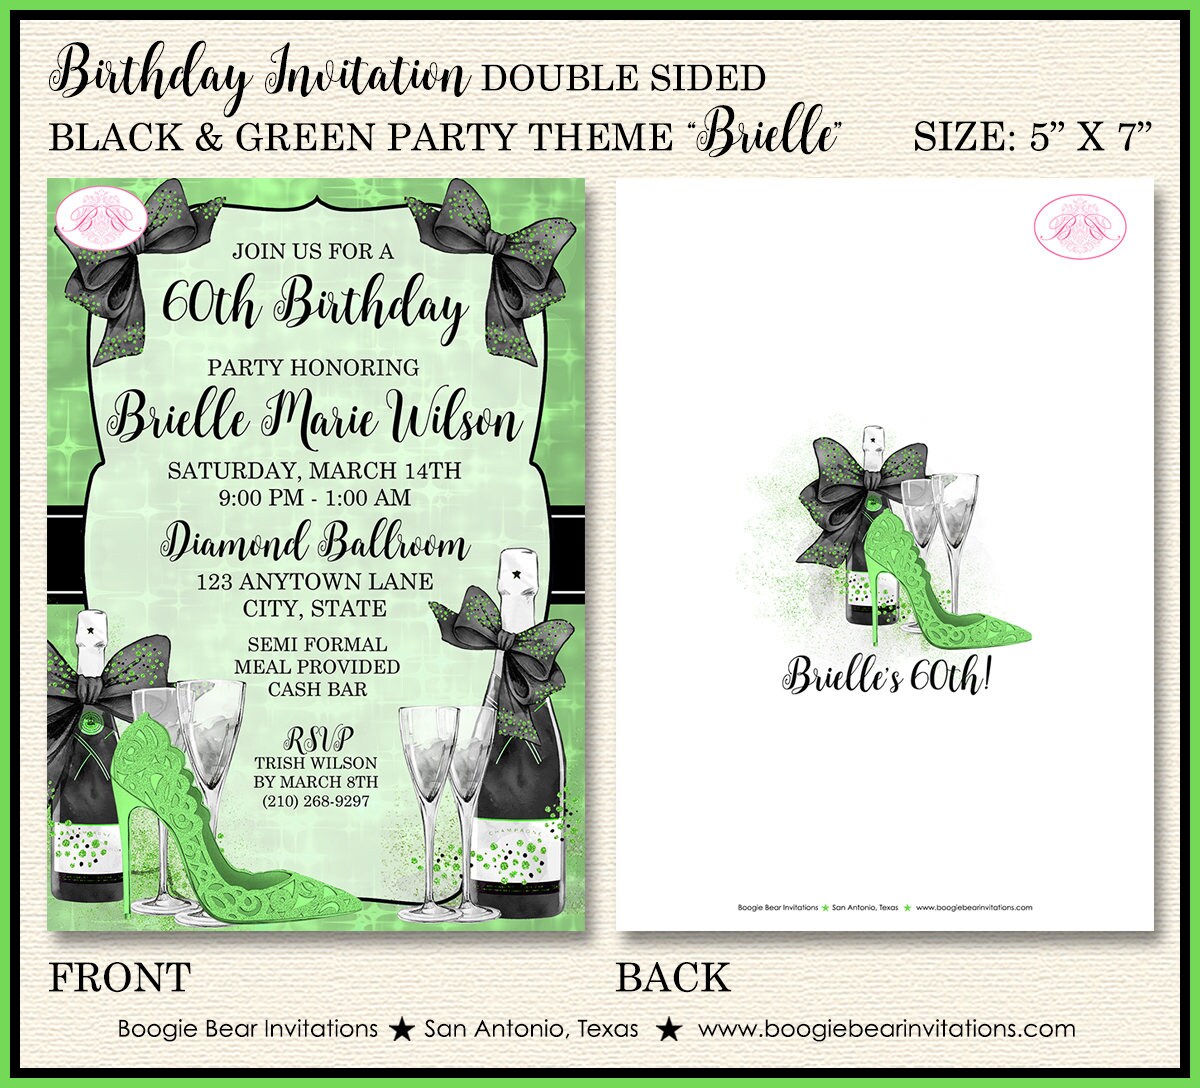 Black & Green Modern Birthday Party Invitation Lucky Fashionista Shop Chic Boogie Bear Invitations Brielle Theme Paperless Printable Printed